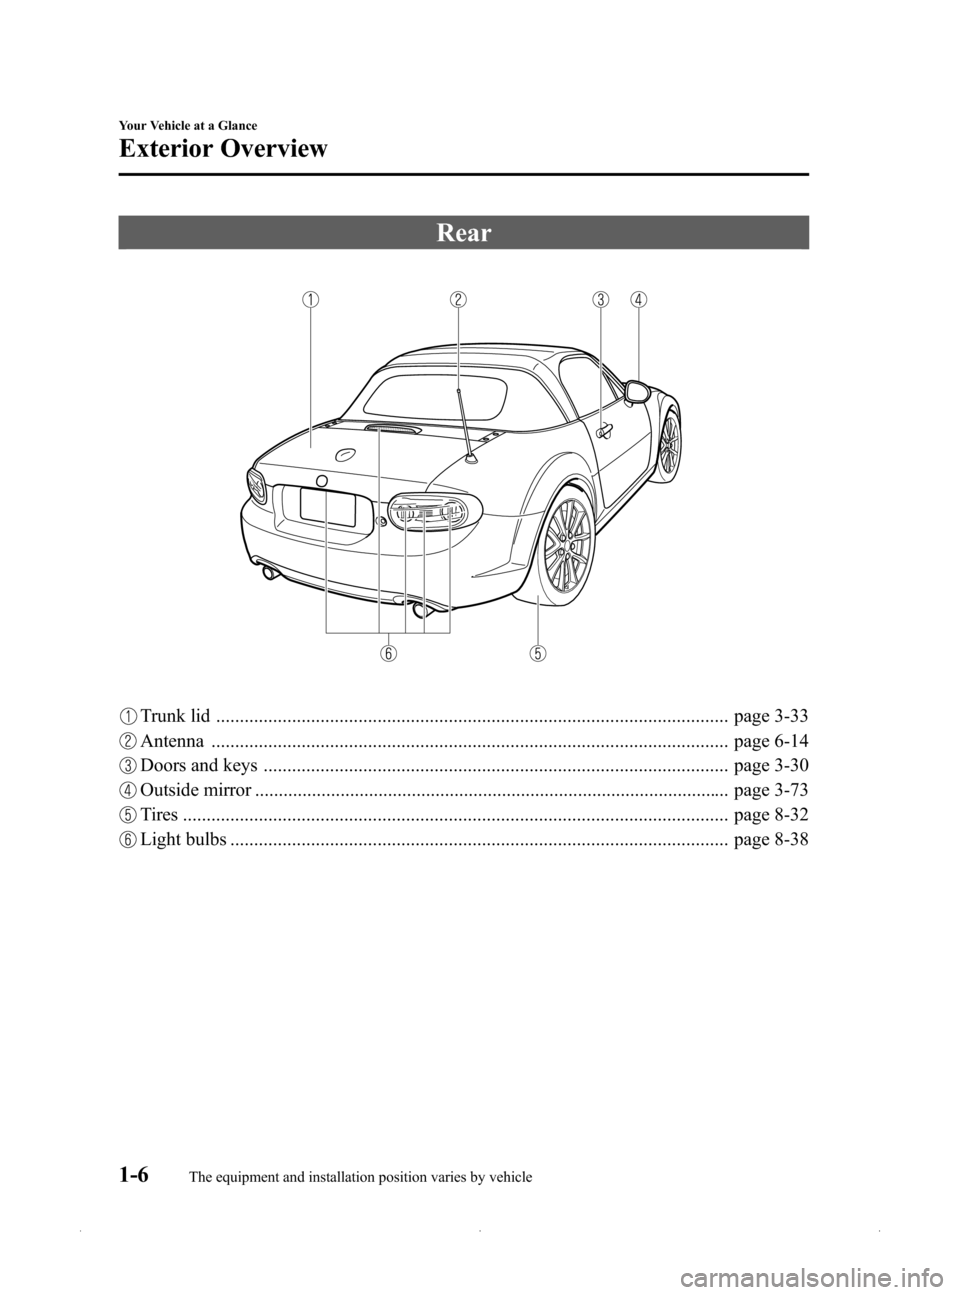 MAZDA MODEL MX-5 2015   (in English) User Guide Black plate (12,1)
Rear
Trunk lid ............................................................................................................ page 3-33
Antenna .......................................